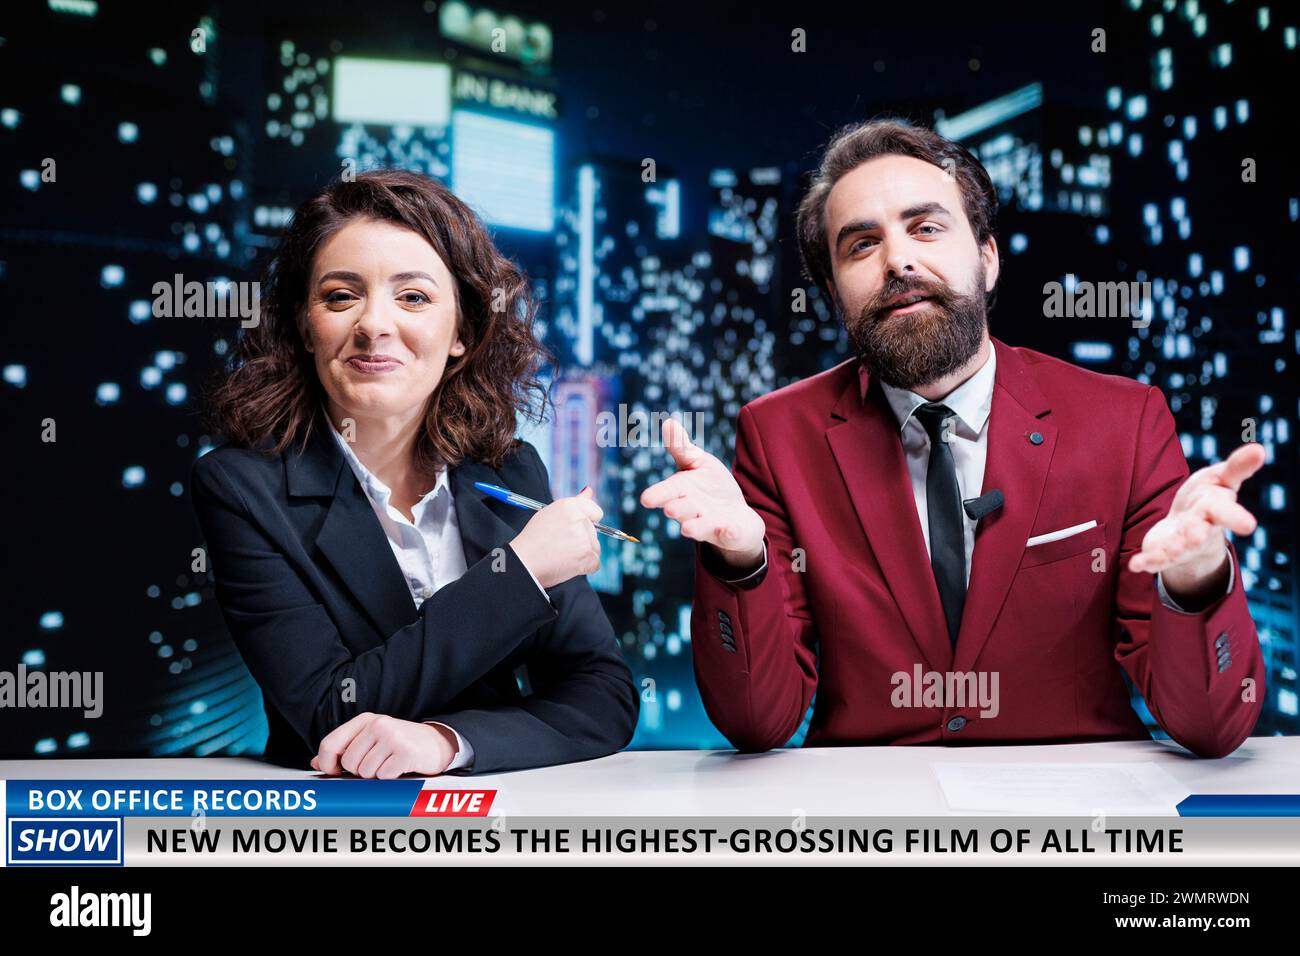 Newscasters team reveal new movie premiere breaking box office records, broadcasting live on midnight talk show. Presenters discussing about successful film winning awards, newsroom. Stock Photo